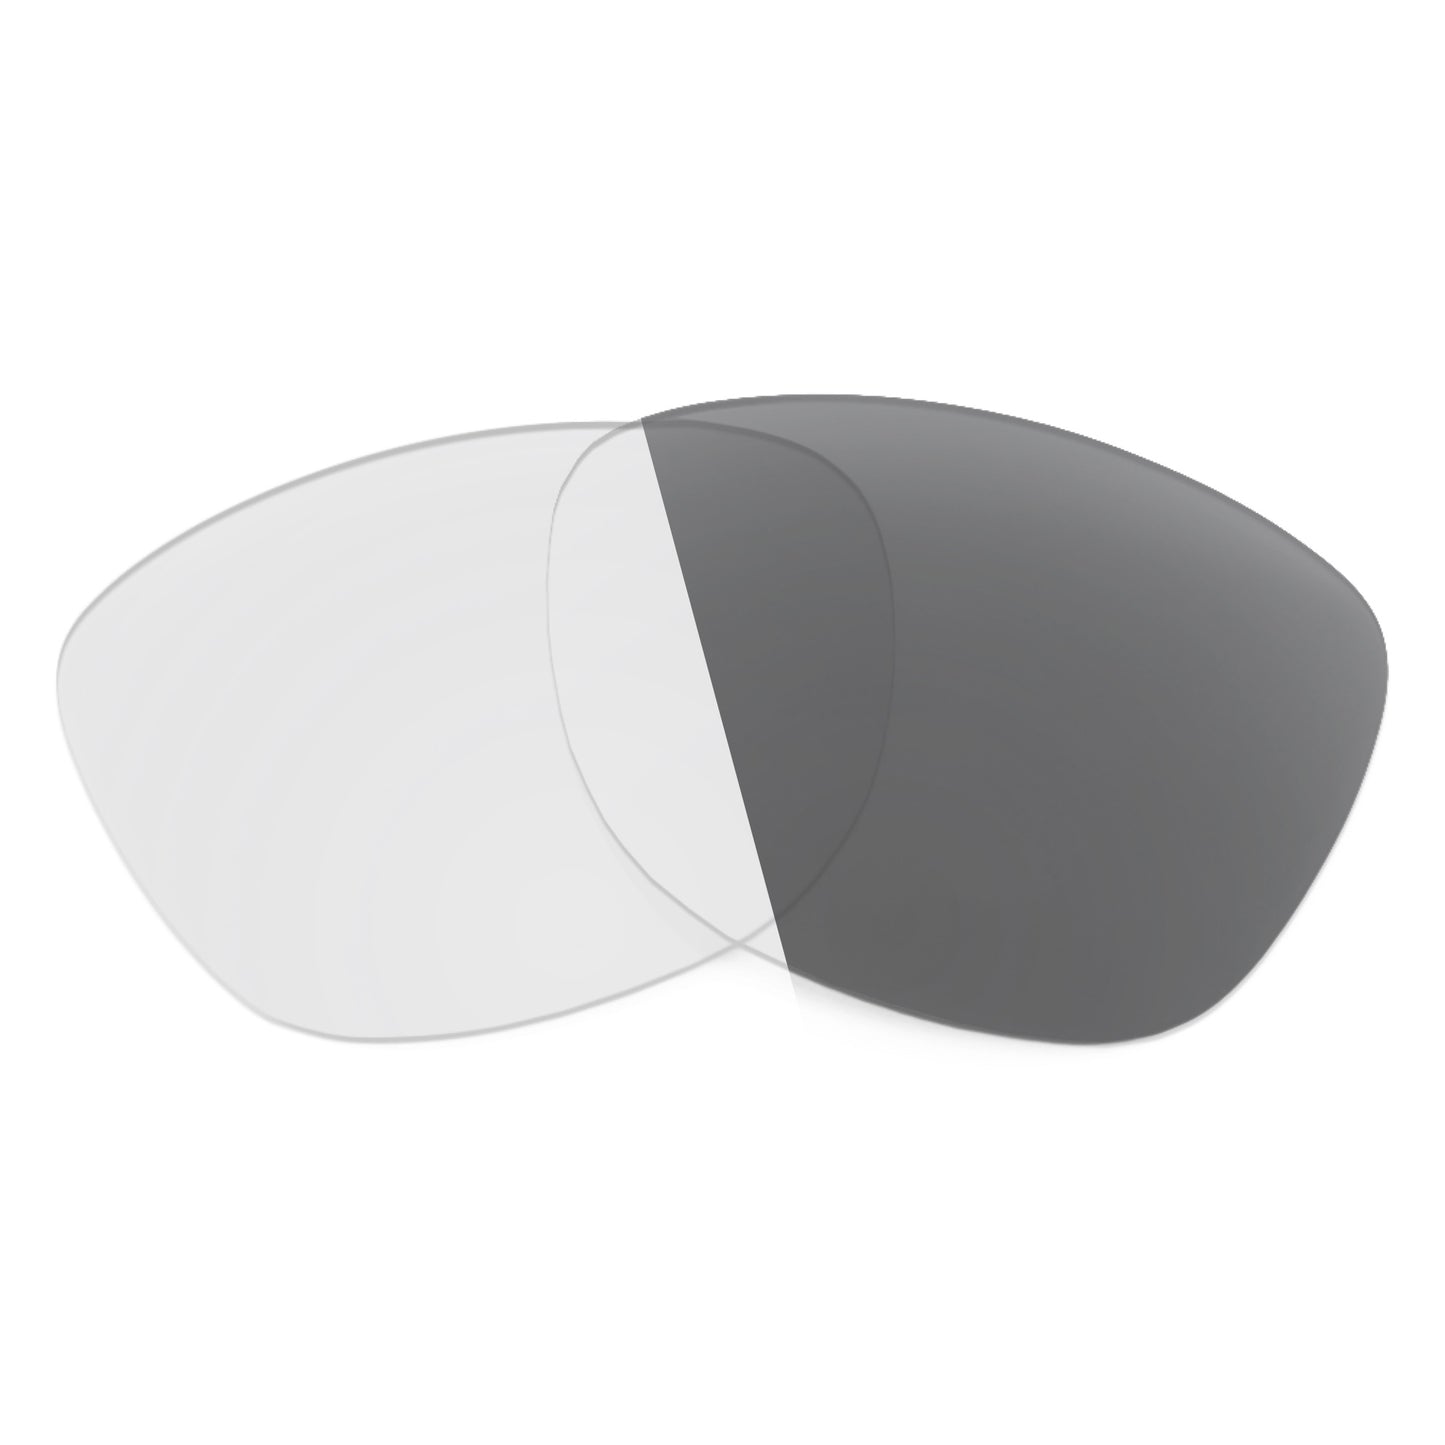 Revant replacement lenses for Ray-Ban RB4181 57mm Non-Polarized Adapt Gray Photochromic